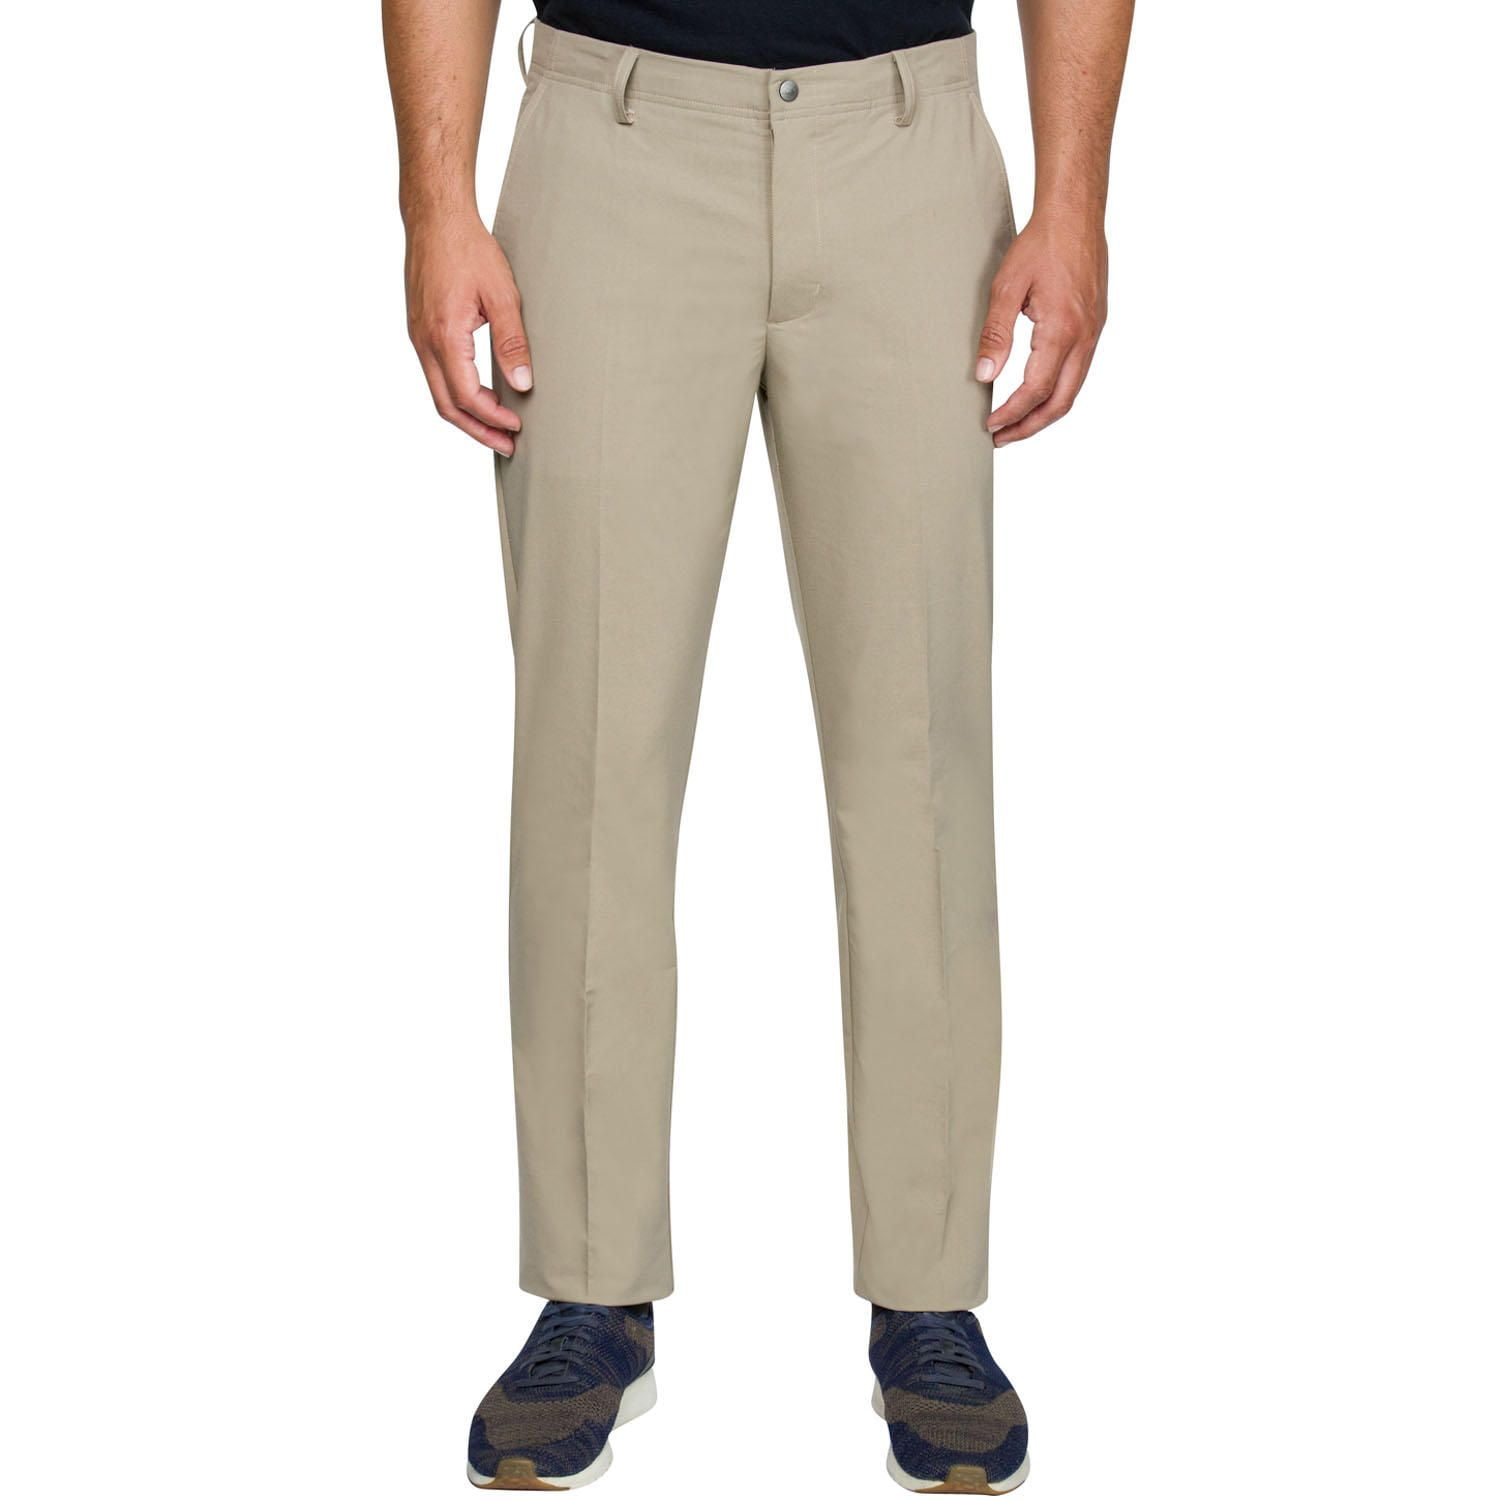 Buy Greg Norman Mens Ml75 Microlux Pant Online at Low Prices in India   Amazonin